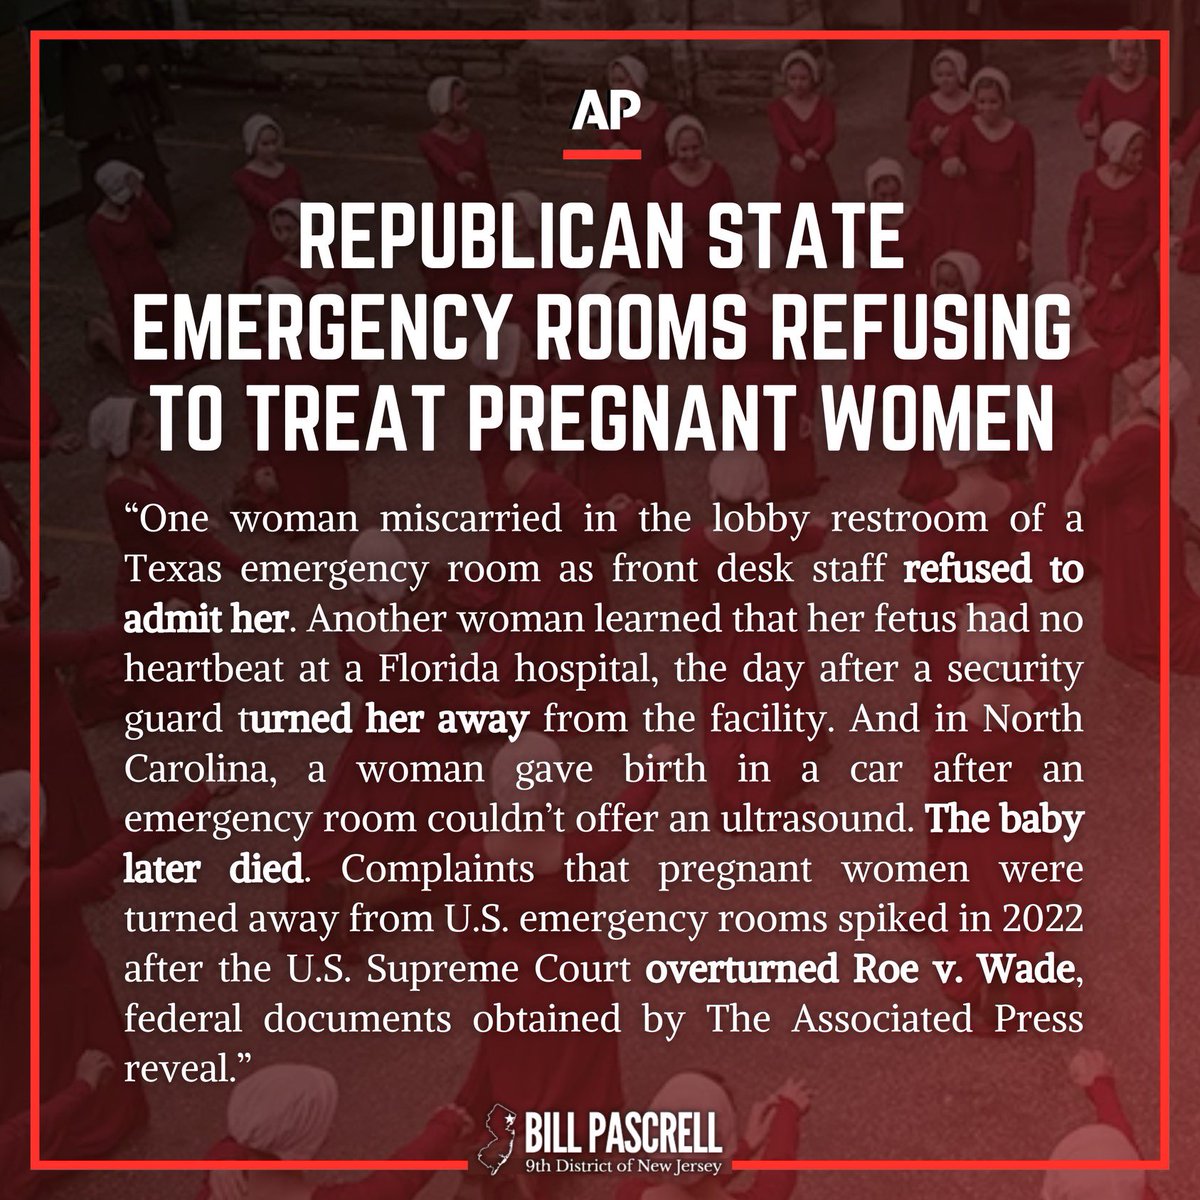 Where we are: emergency rooms are now refusing to treat pregnant women because of republican laws. Trump wants this future in every state in America